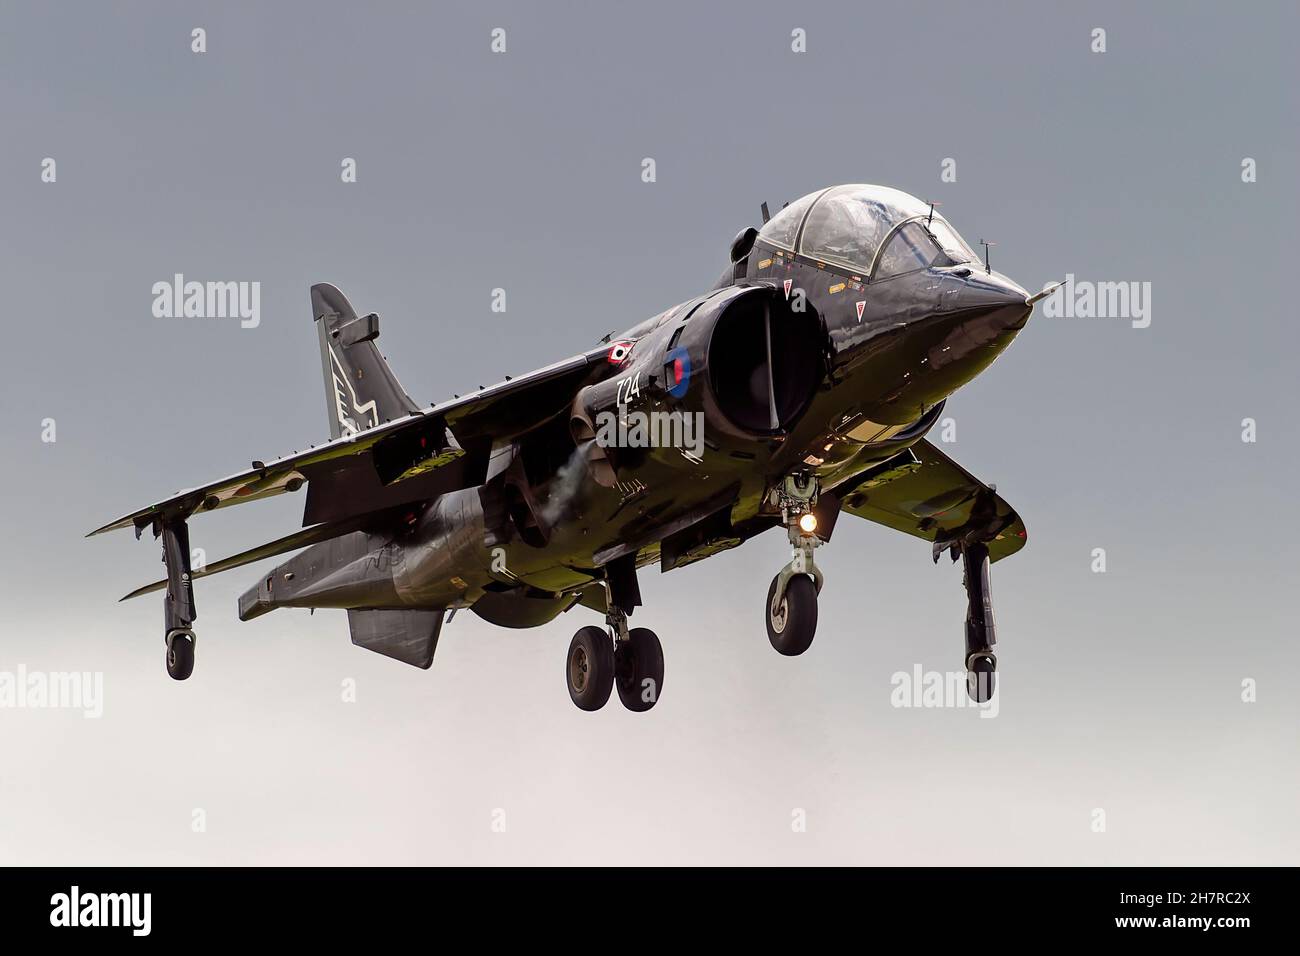 Yeovilton, Somerset, UK - Settembre 17 2004: A British Aerospace Hawker Siddeley Harrier T.8, Serial No. ZB603, Code 724 of No.899 Naval Air Squadron Foto Stock